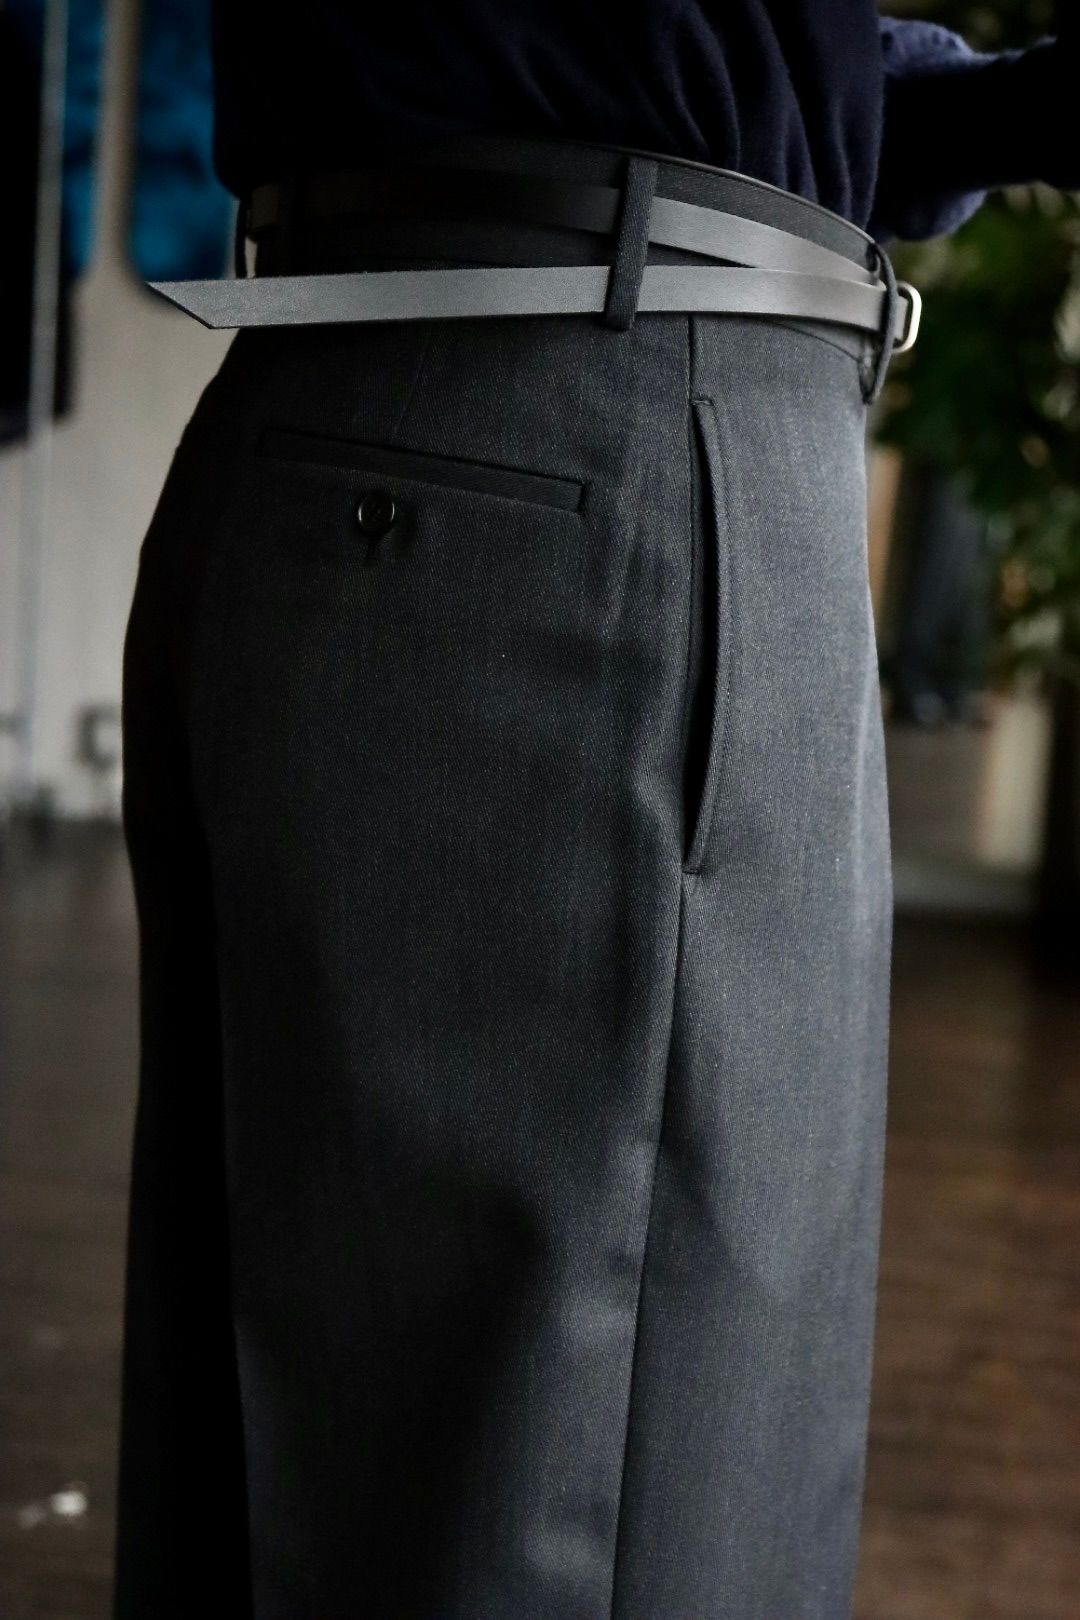 A.PRESSE Covert Cloth Trousers CHARCOAL | www.innoveering.net